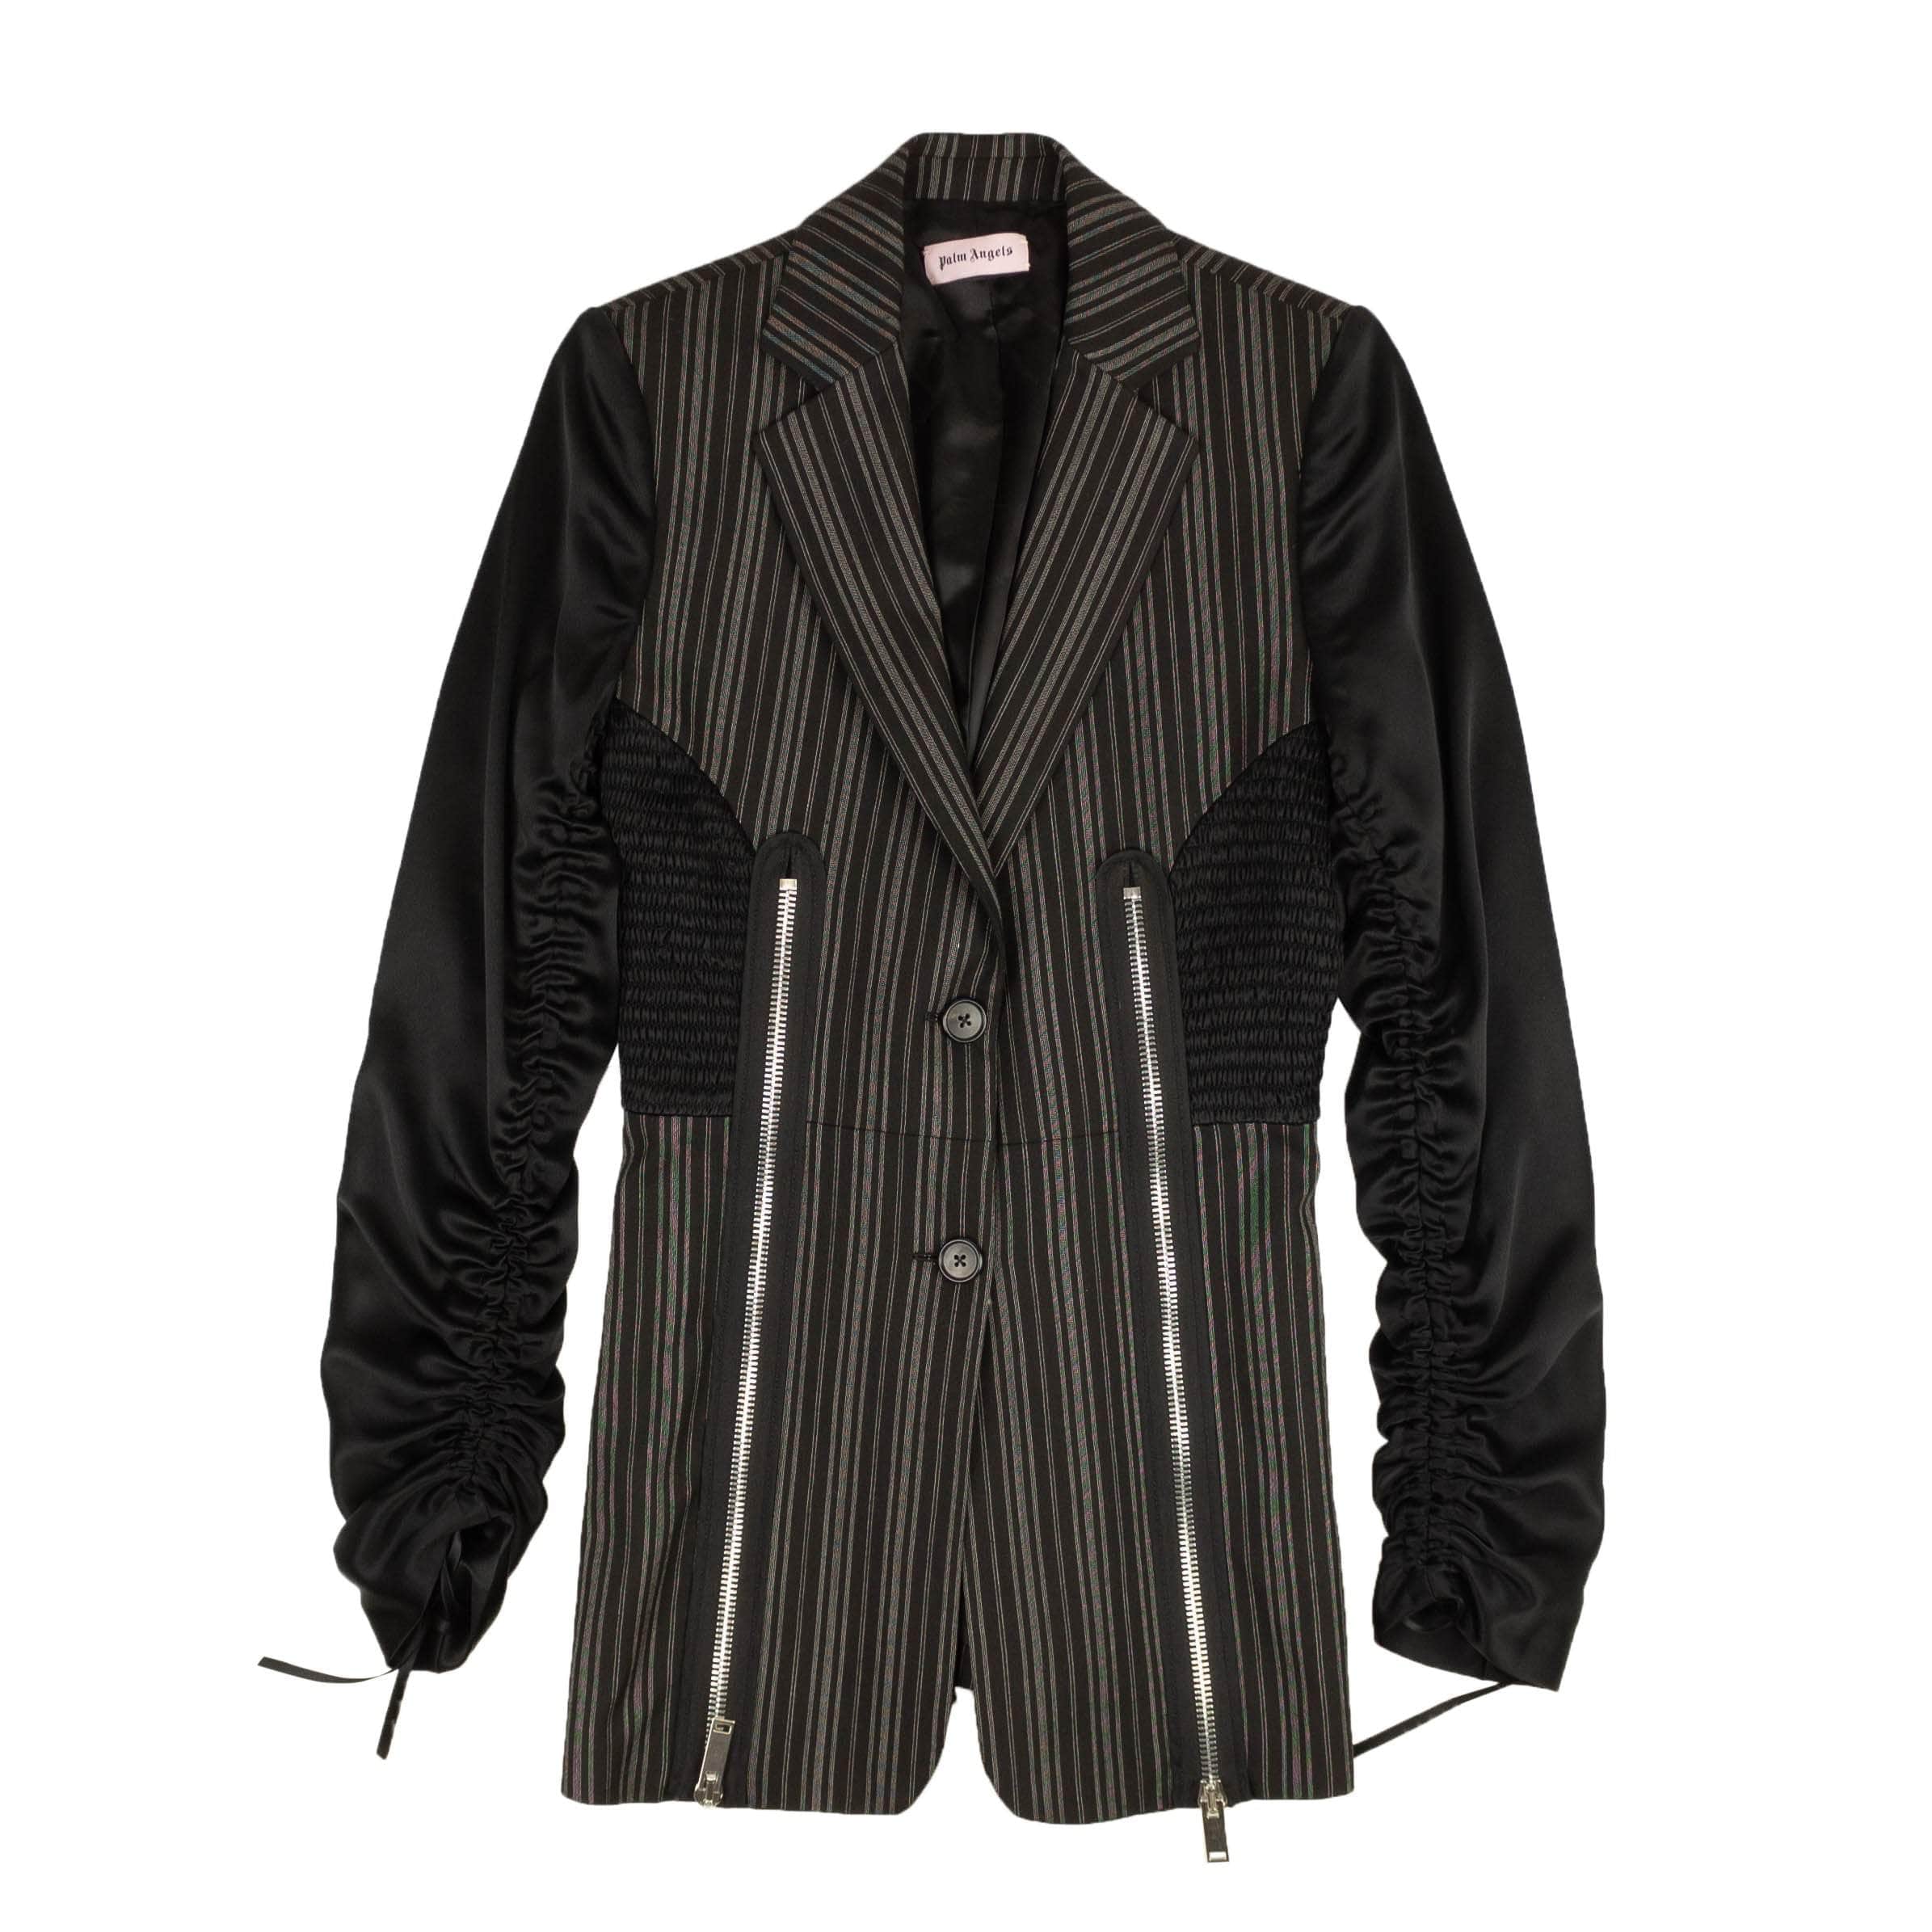 Palm Angels 1000-2000, channelenable-all, chicmi, couponcollection, gender-womens, main-clothing, palm-angels, size-40, womens-jackets-blazers 40 Black Stripe Cinched Blazer 82NGG-PA-27/40 82NGG-PA-27/40